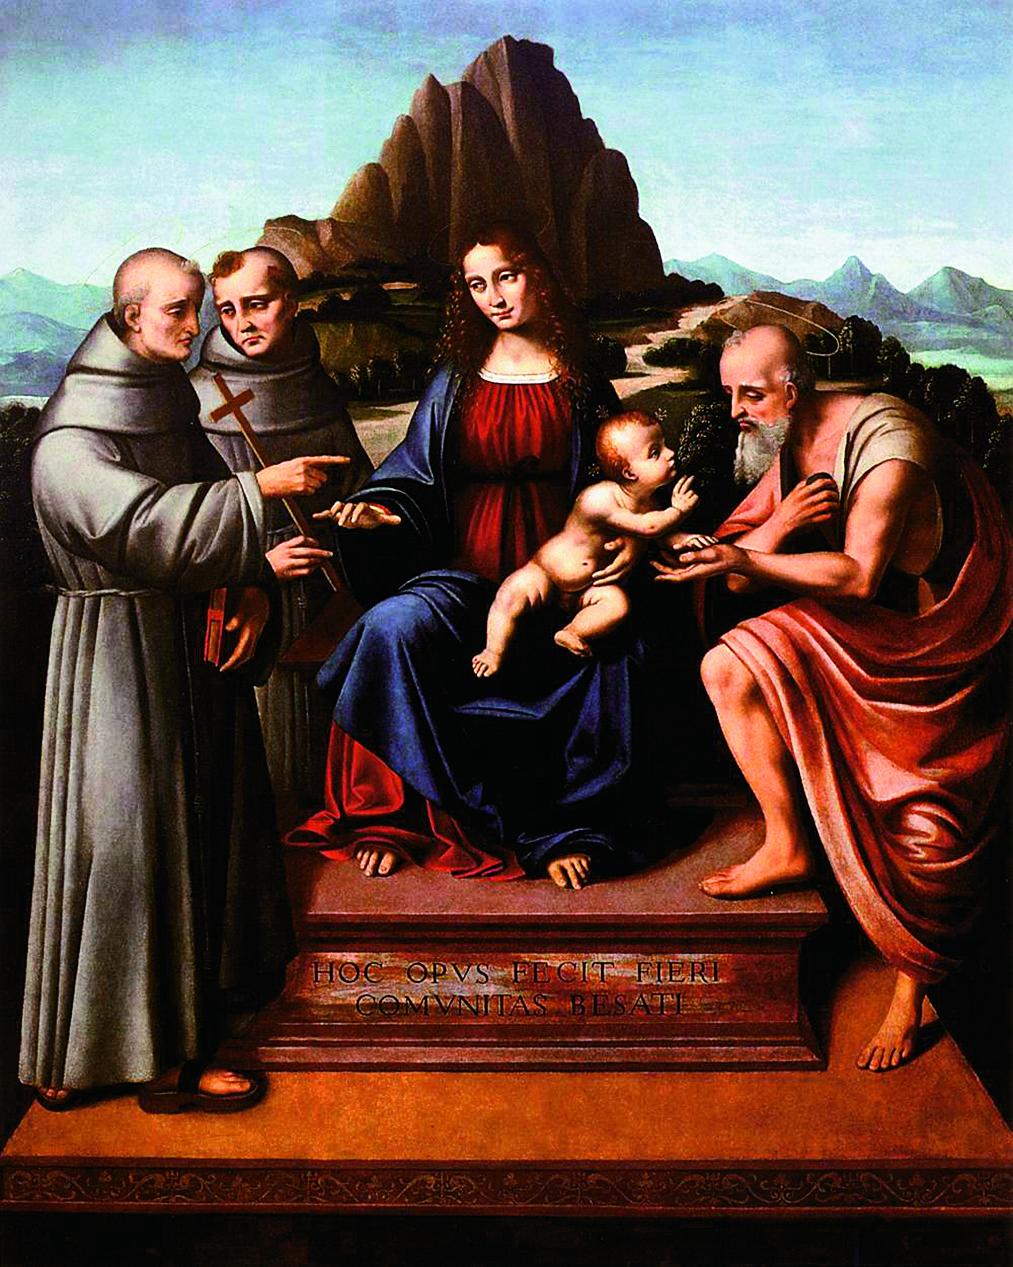 Virgin and Child Enthroned with Saints, ca. 1524. Hollis notes, The stylized mountain directly behind the Holy Pair almost appears to be an extension of their throne, with more naturalistic mountains also prominent in the background. [Image] Marco d'Oggiono